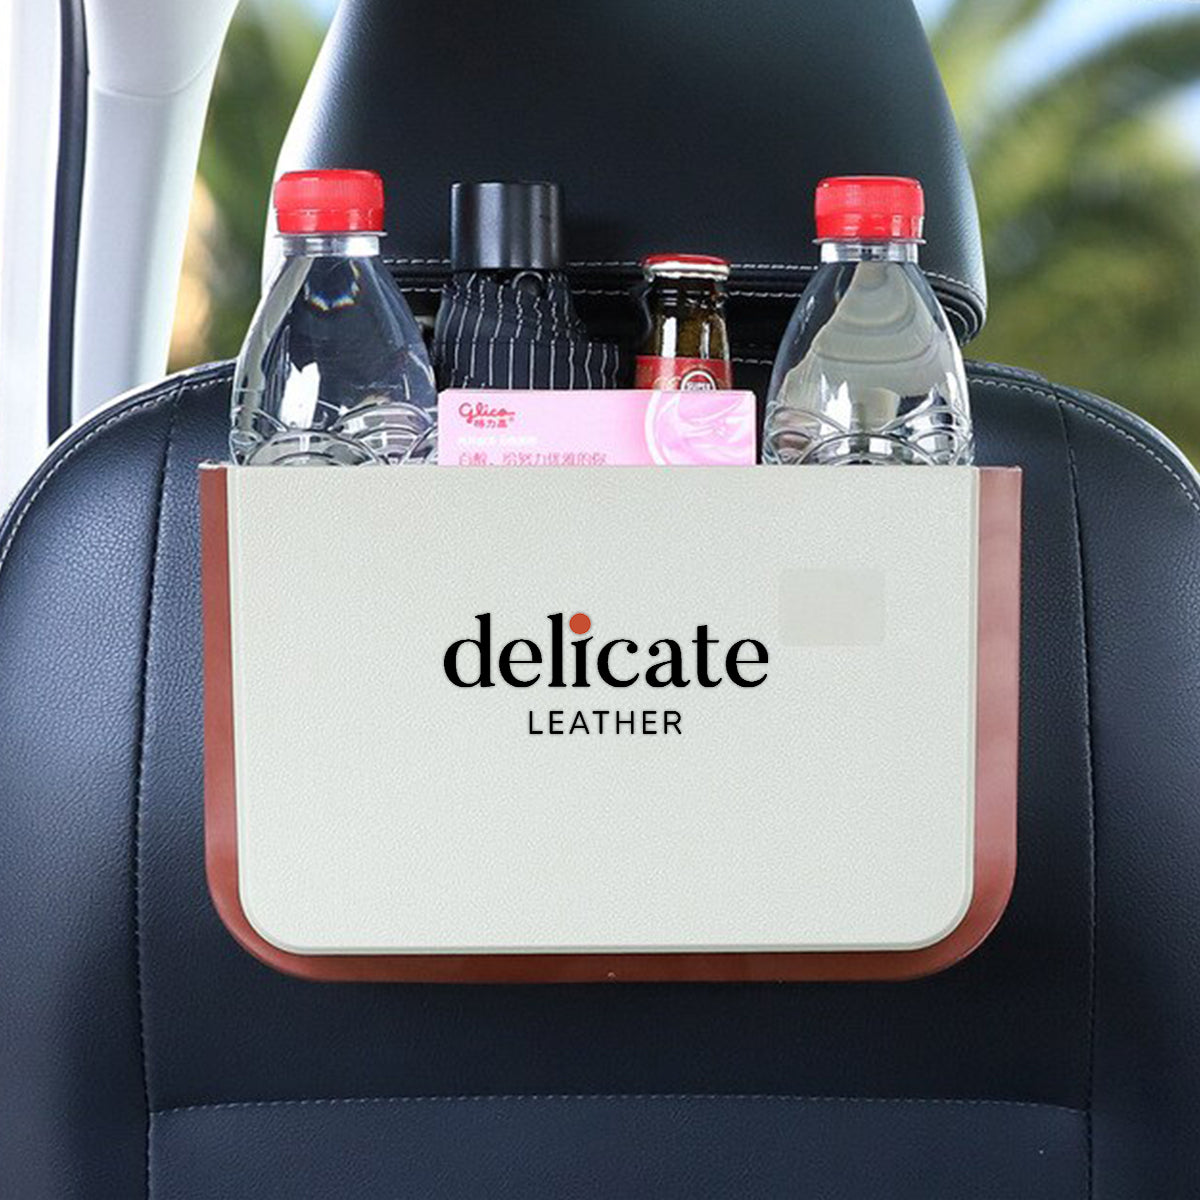 Hanging Waterproof Car Trash can-Foldable, Custom For Your Cars, Waterproof, and Equipped with Cup Holders and Trays. Multi-Purpose, Car Accessories FD11992 - Delicate Leather